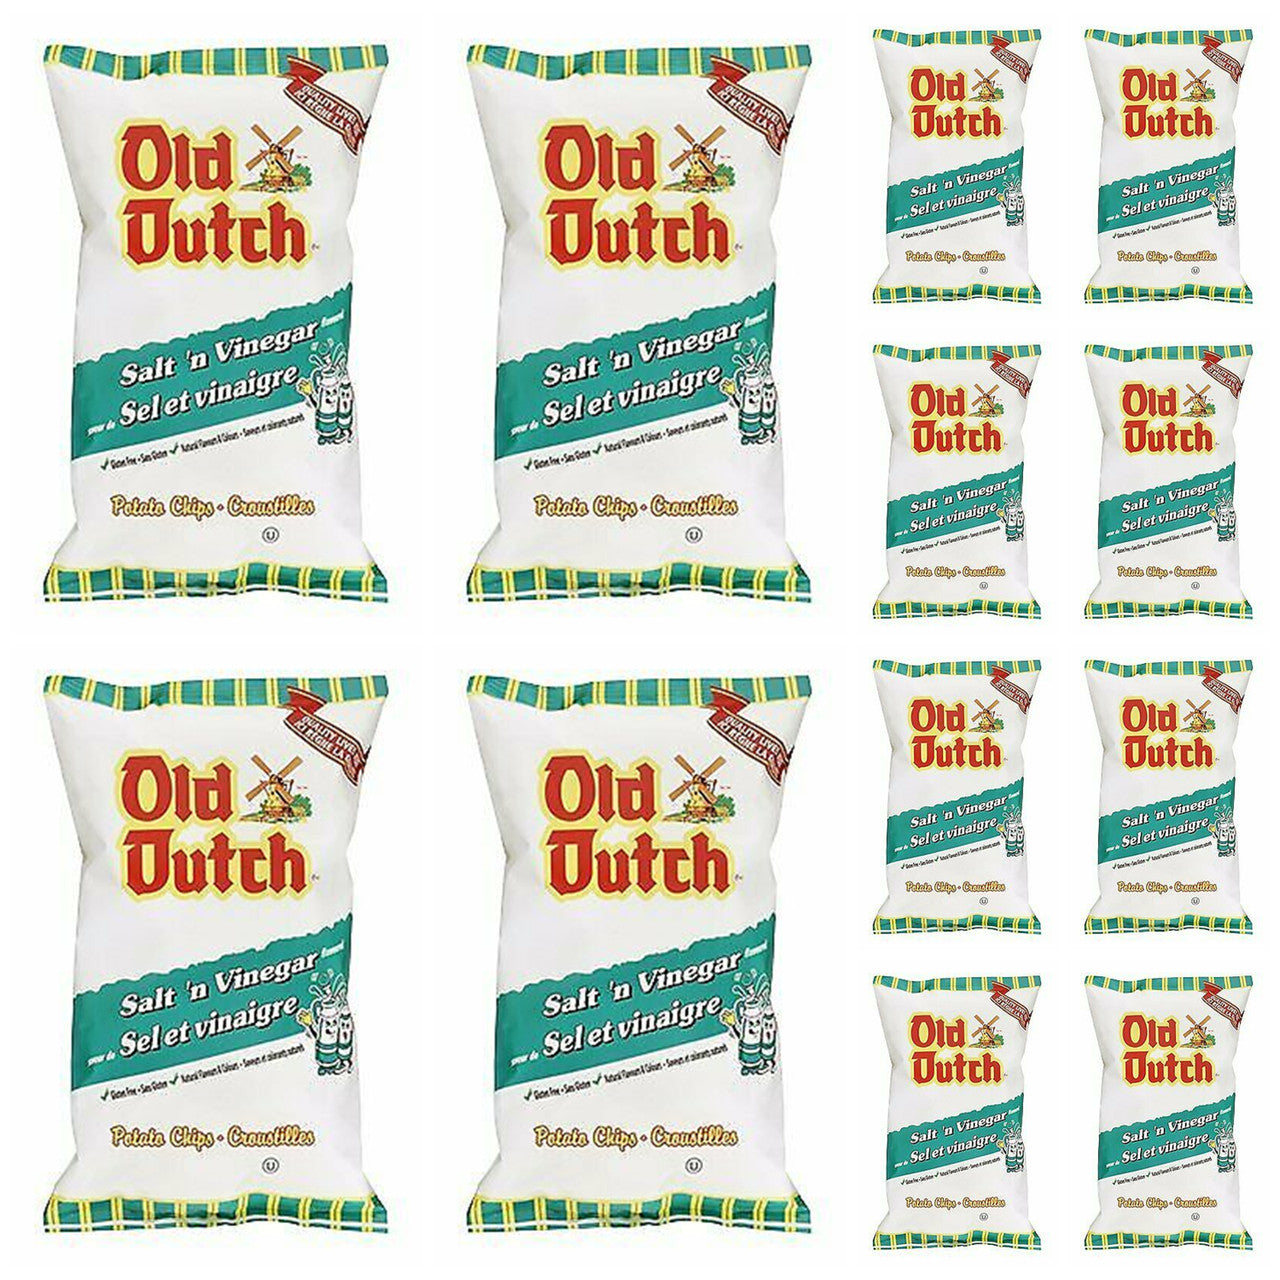 Old Dutch Potato Chips, Salt & Vinegar, 40g/1.4oz - (12 Pack) {Imported from Canada}